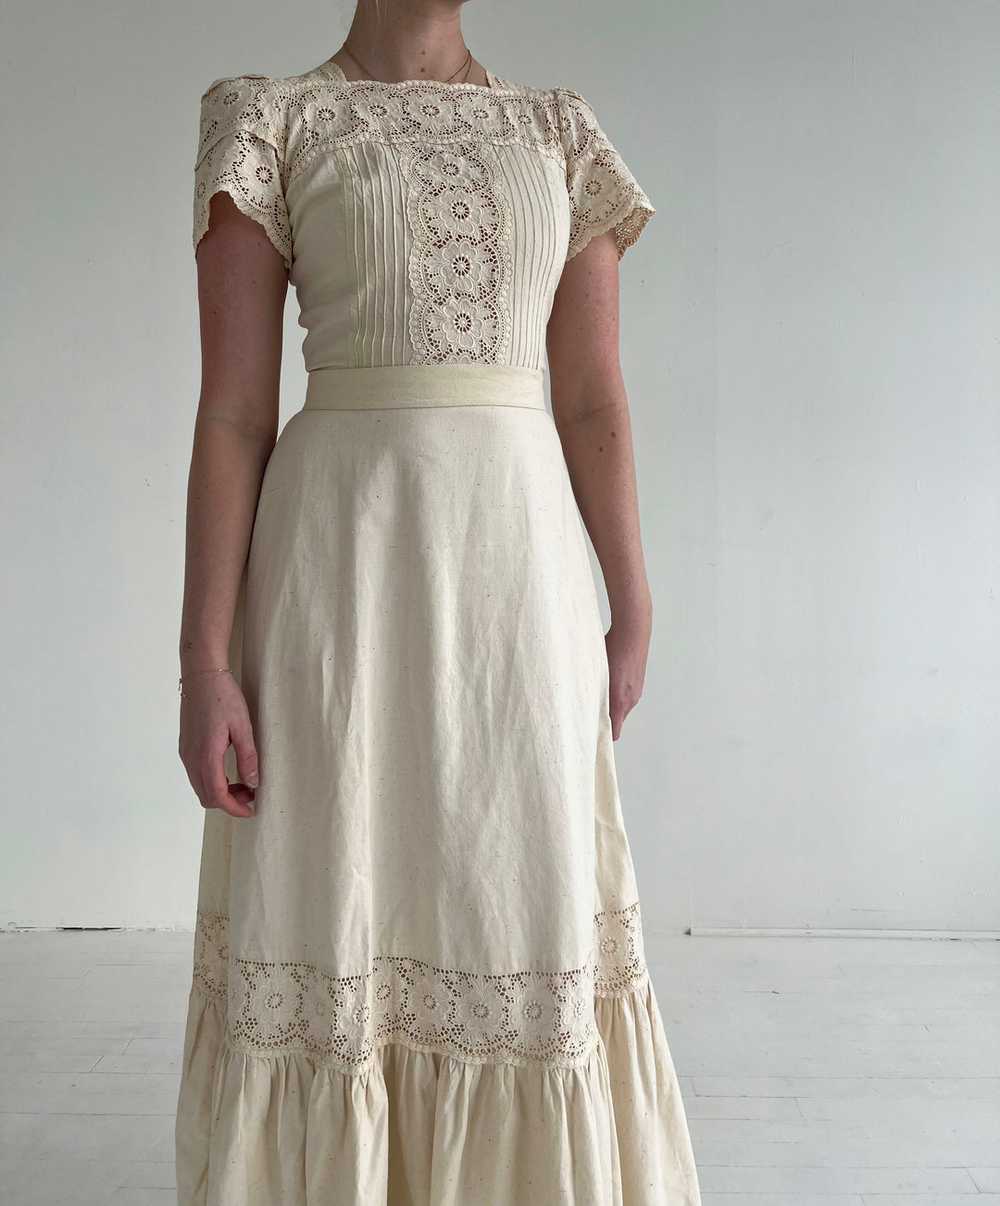 1970's Cotton Dress with Eyelet - image 1